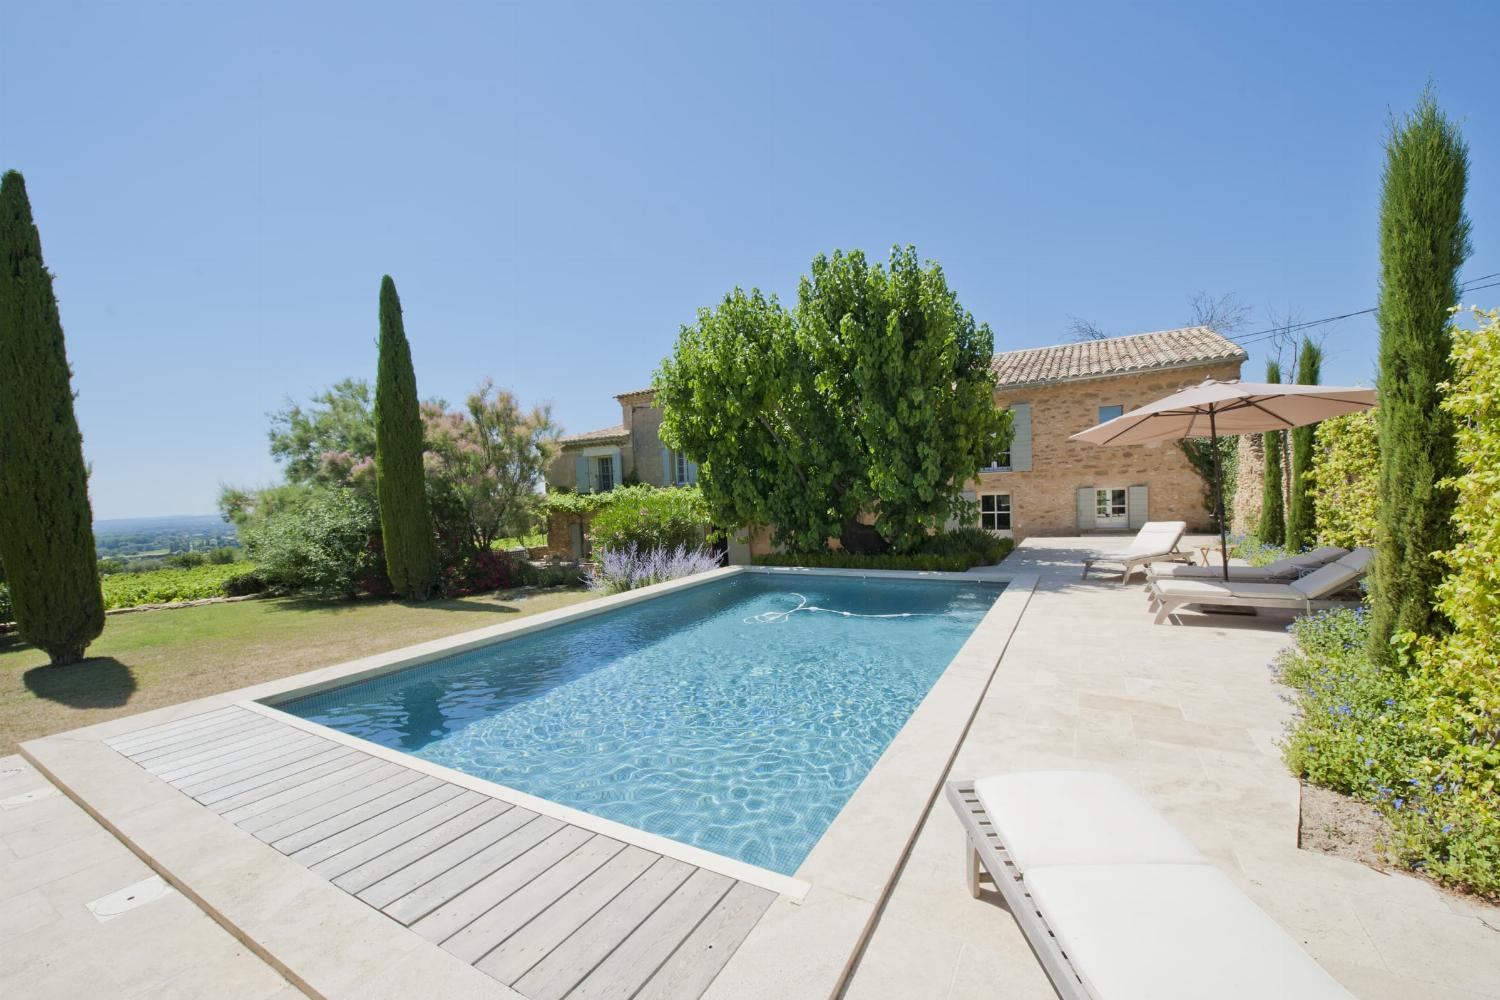 Self-catering home in Provence with private heated poo